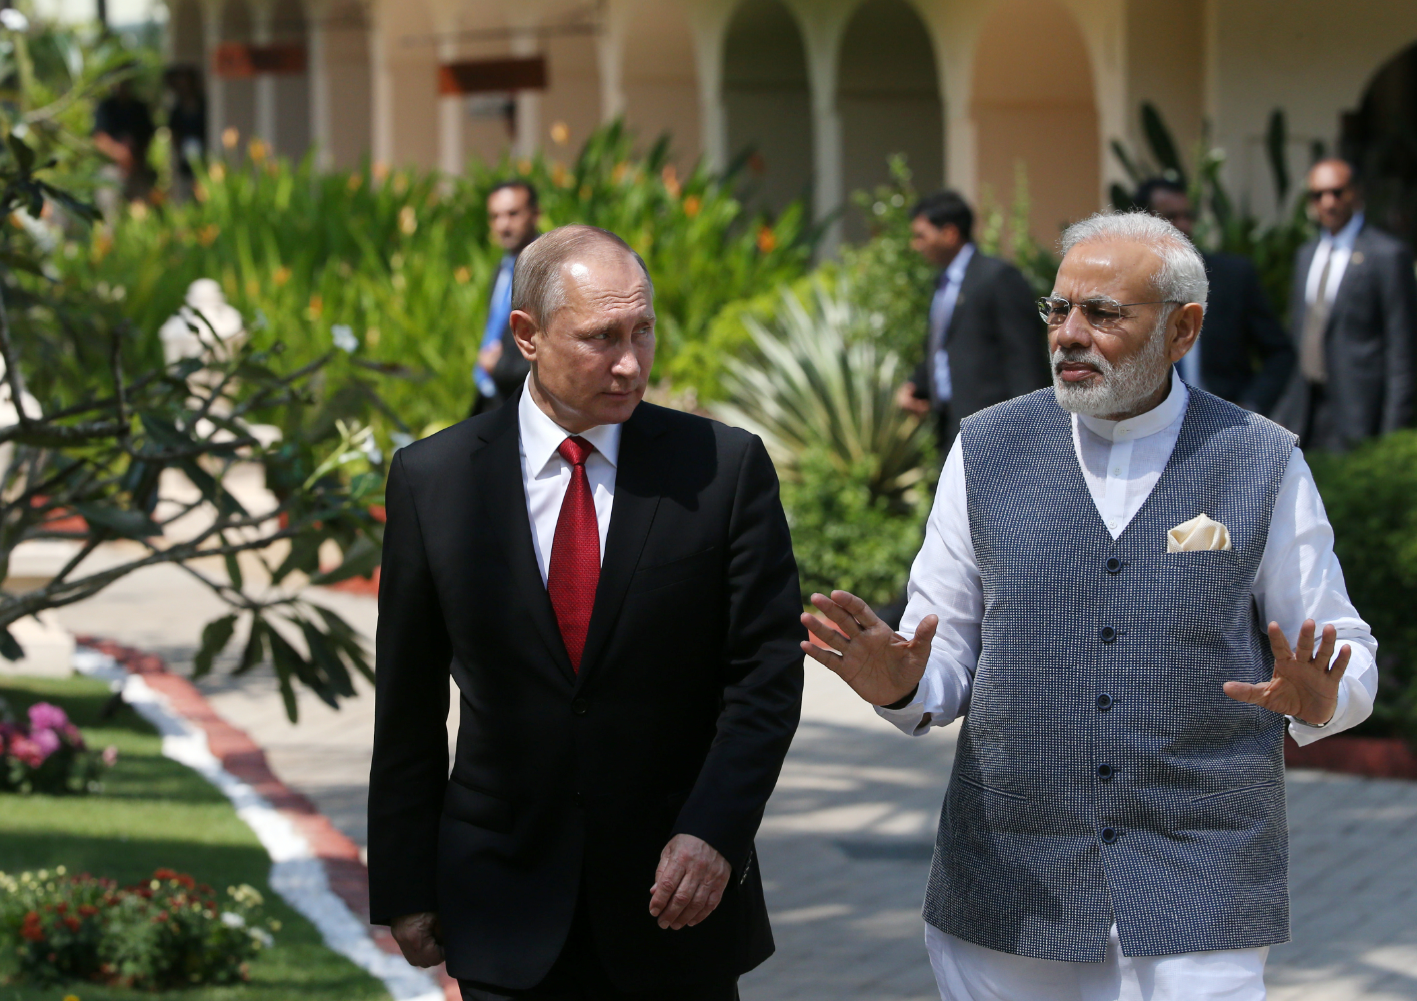 India is described as Russia’s “special privileged strategic partner” in the 2016 Russian Foreign Policy Concept. Source: RIA Novosti